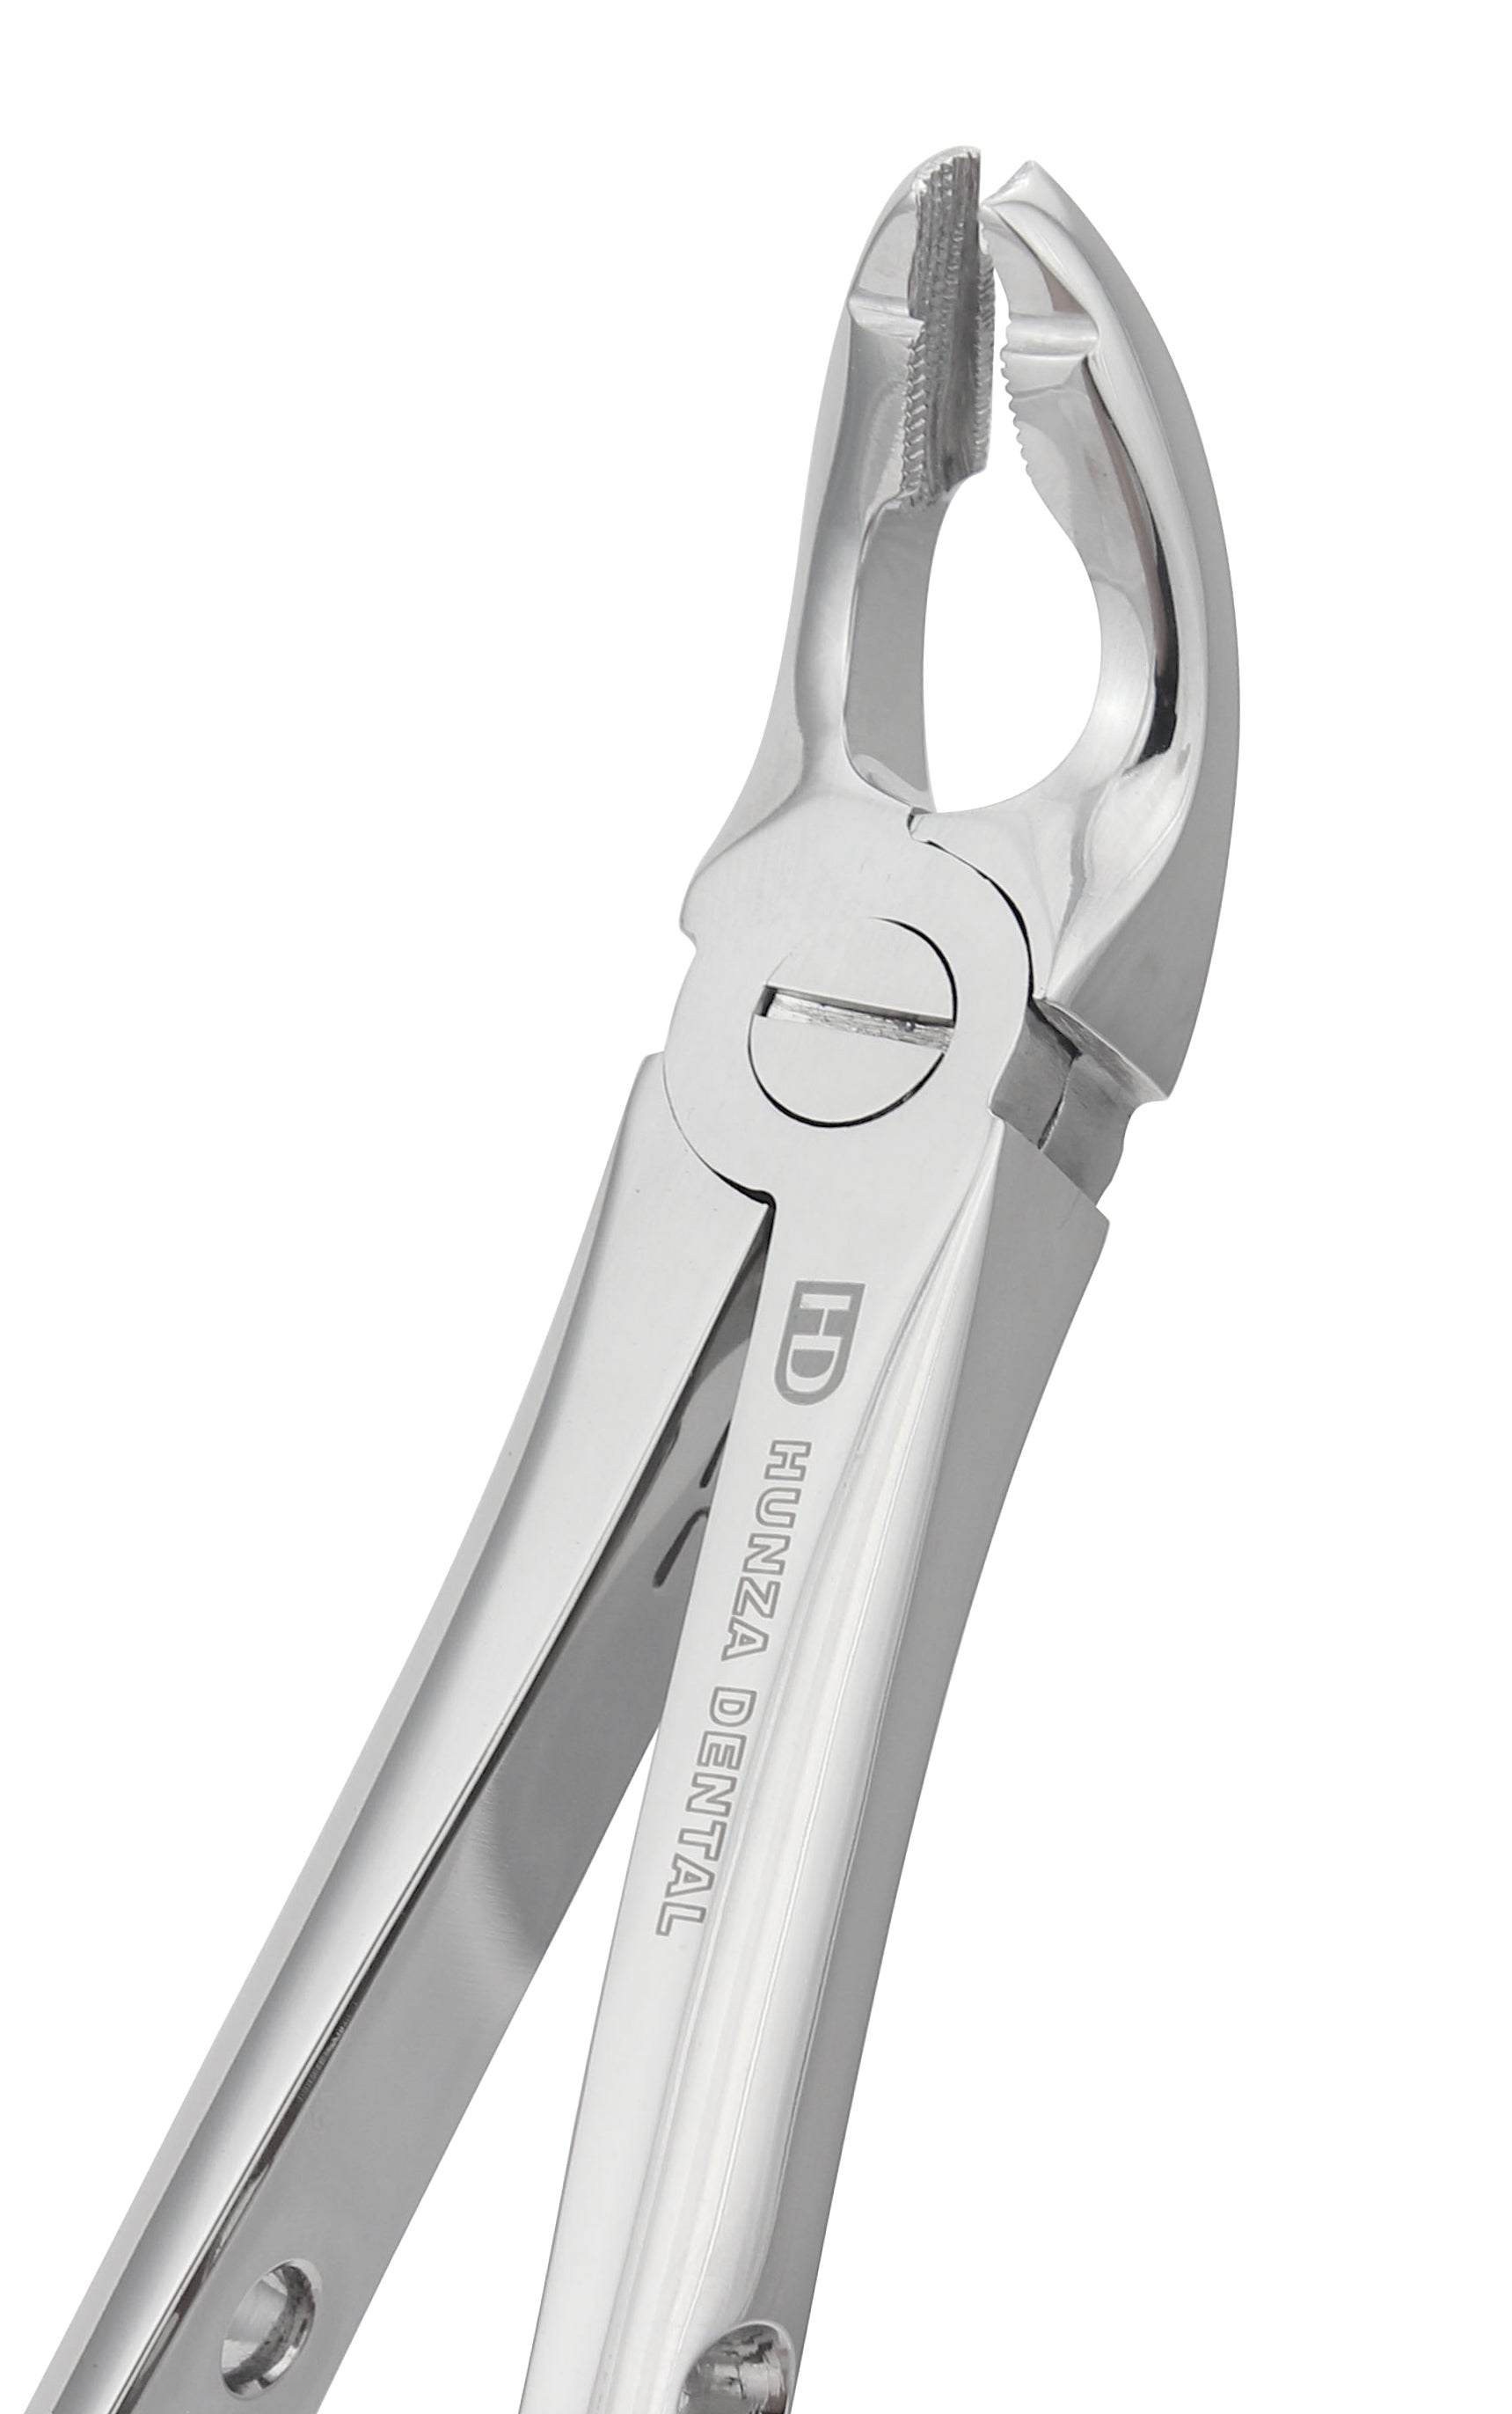 Universal Lower Extraction Forceps 2190